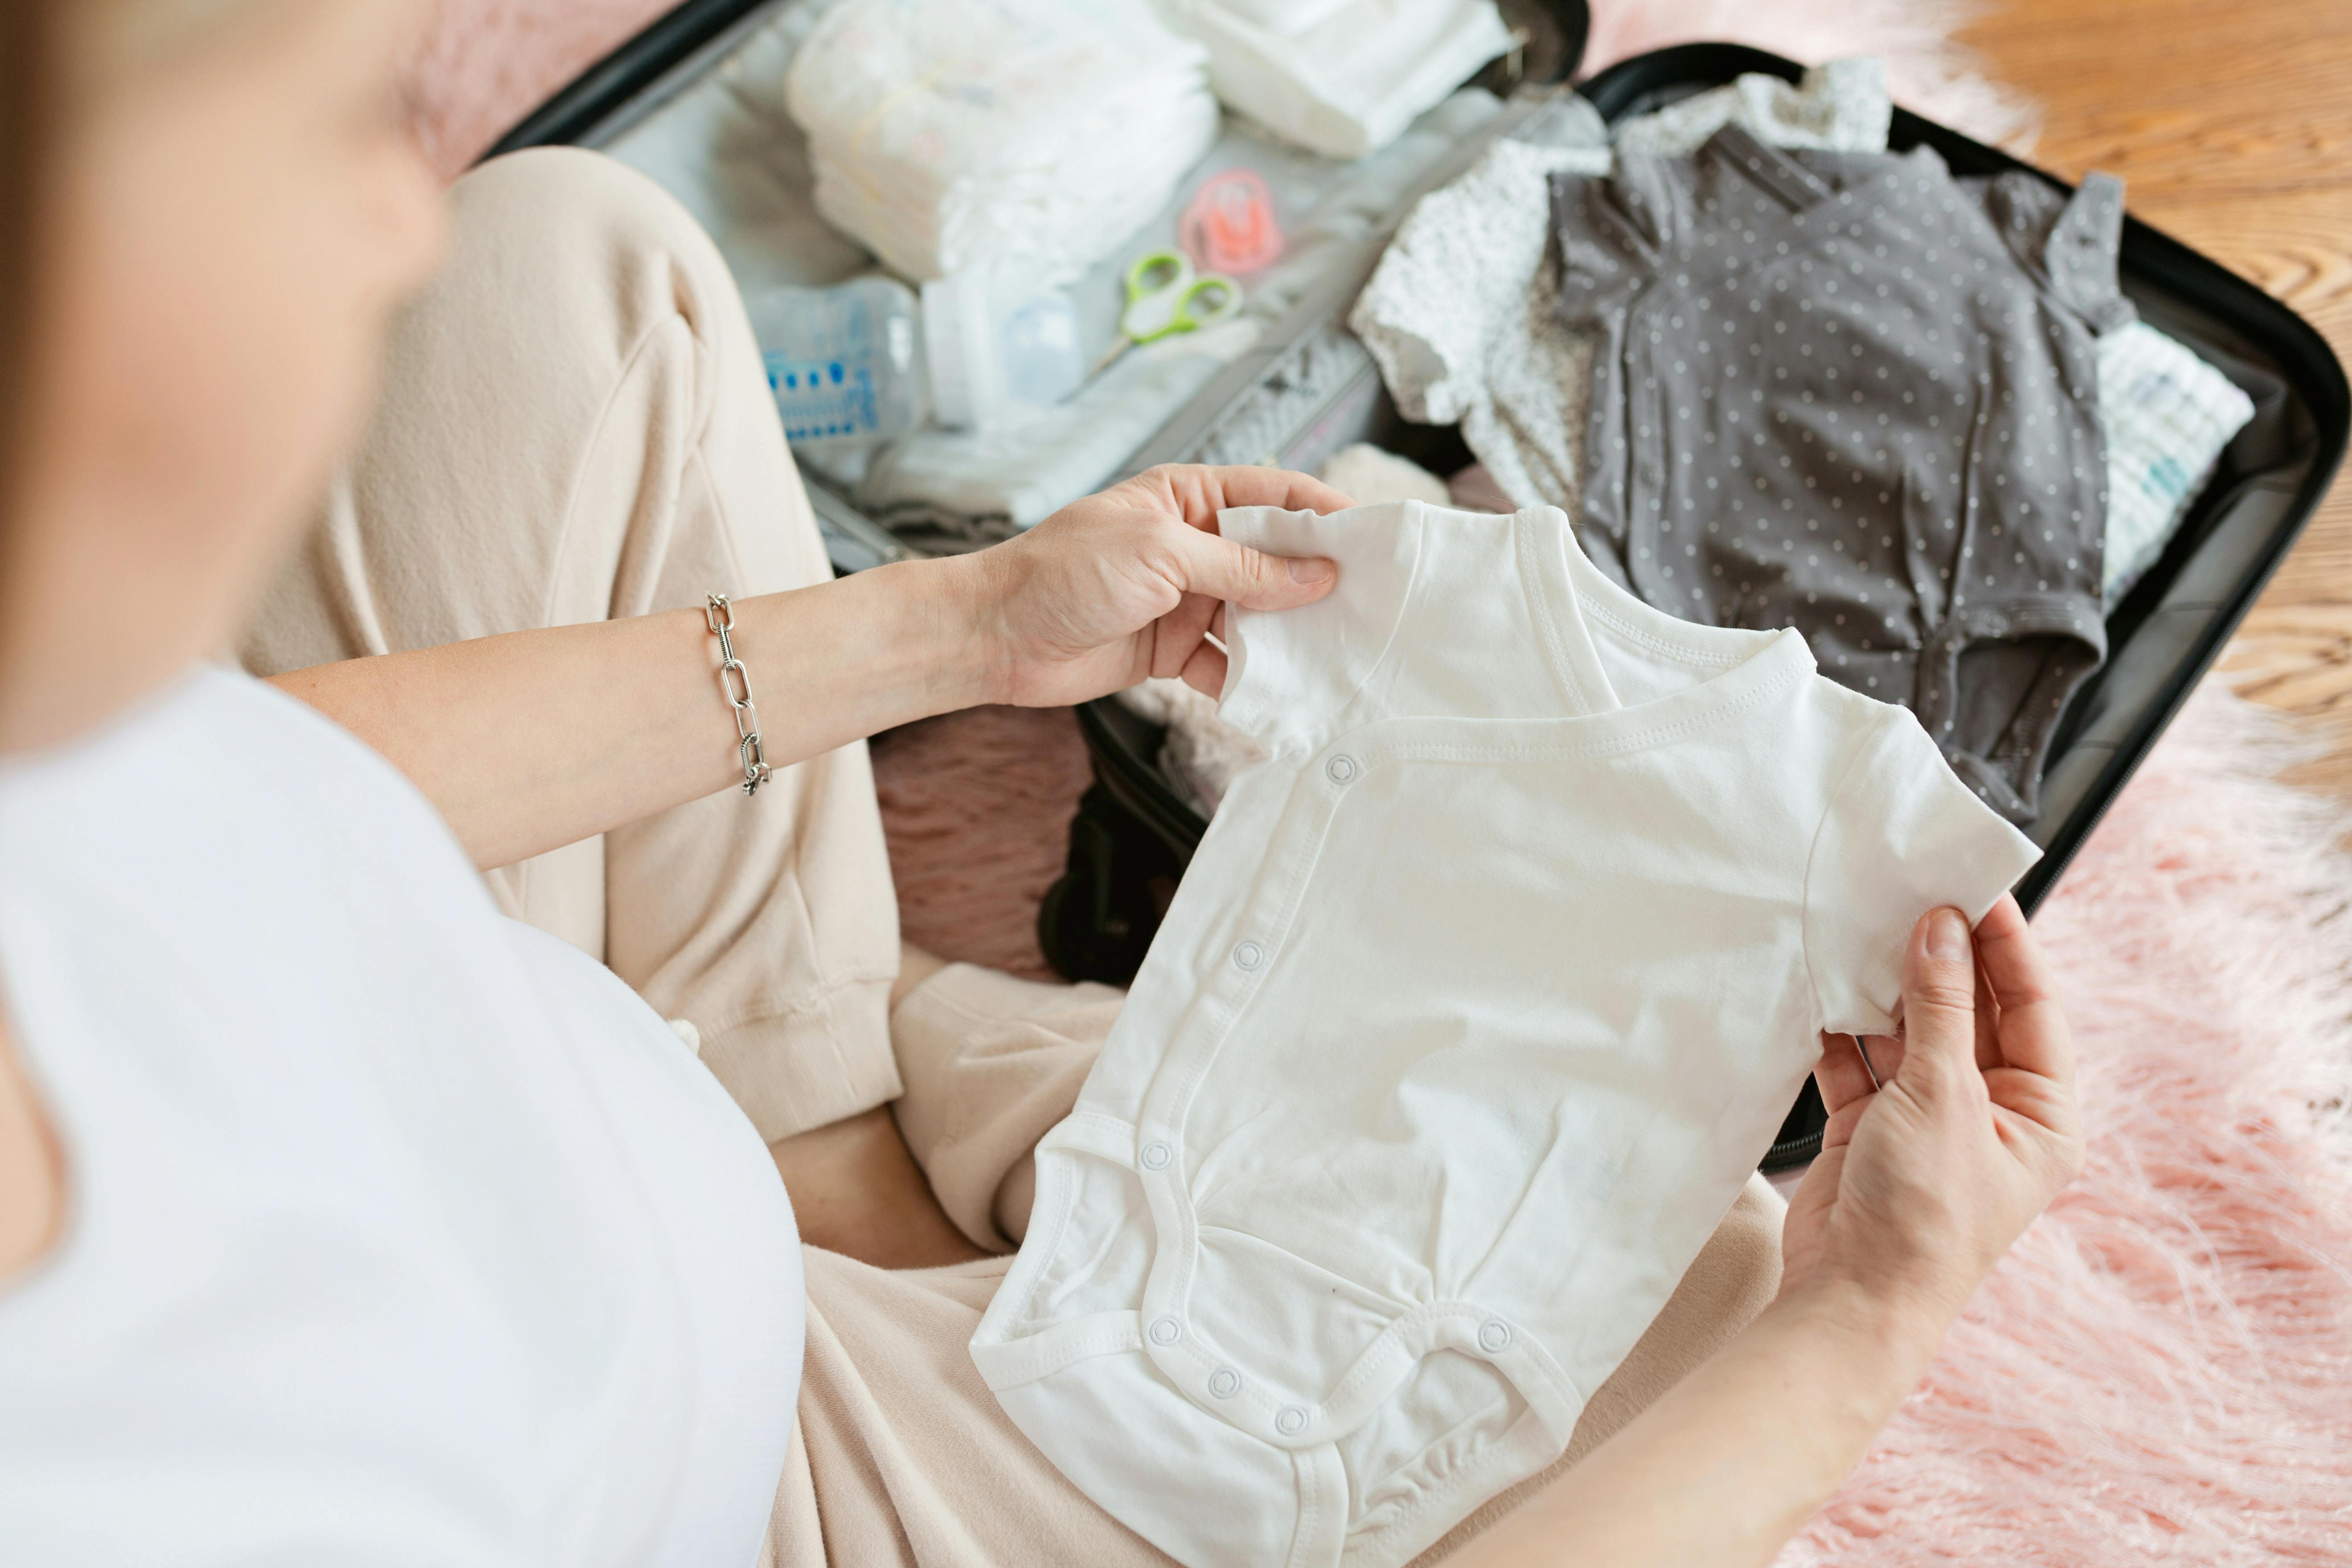 pregnant woman sitting on a shag rug packing baby clothes in a suitcase